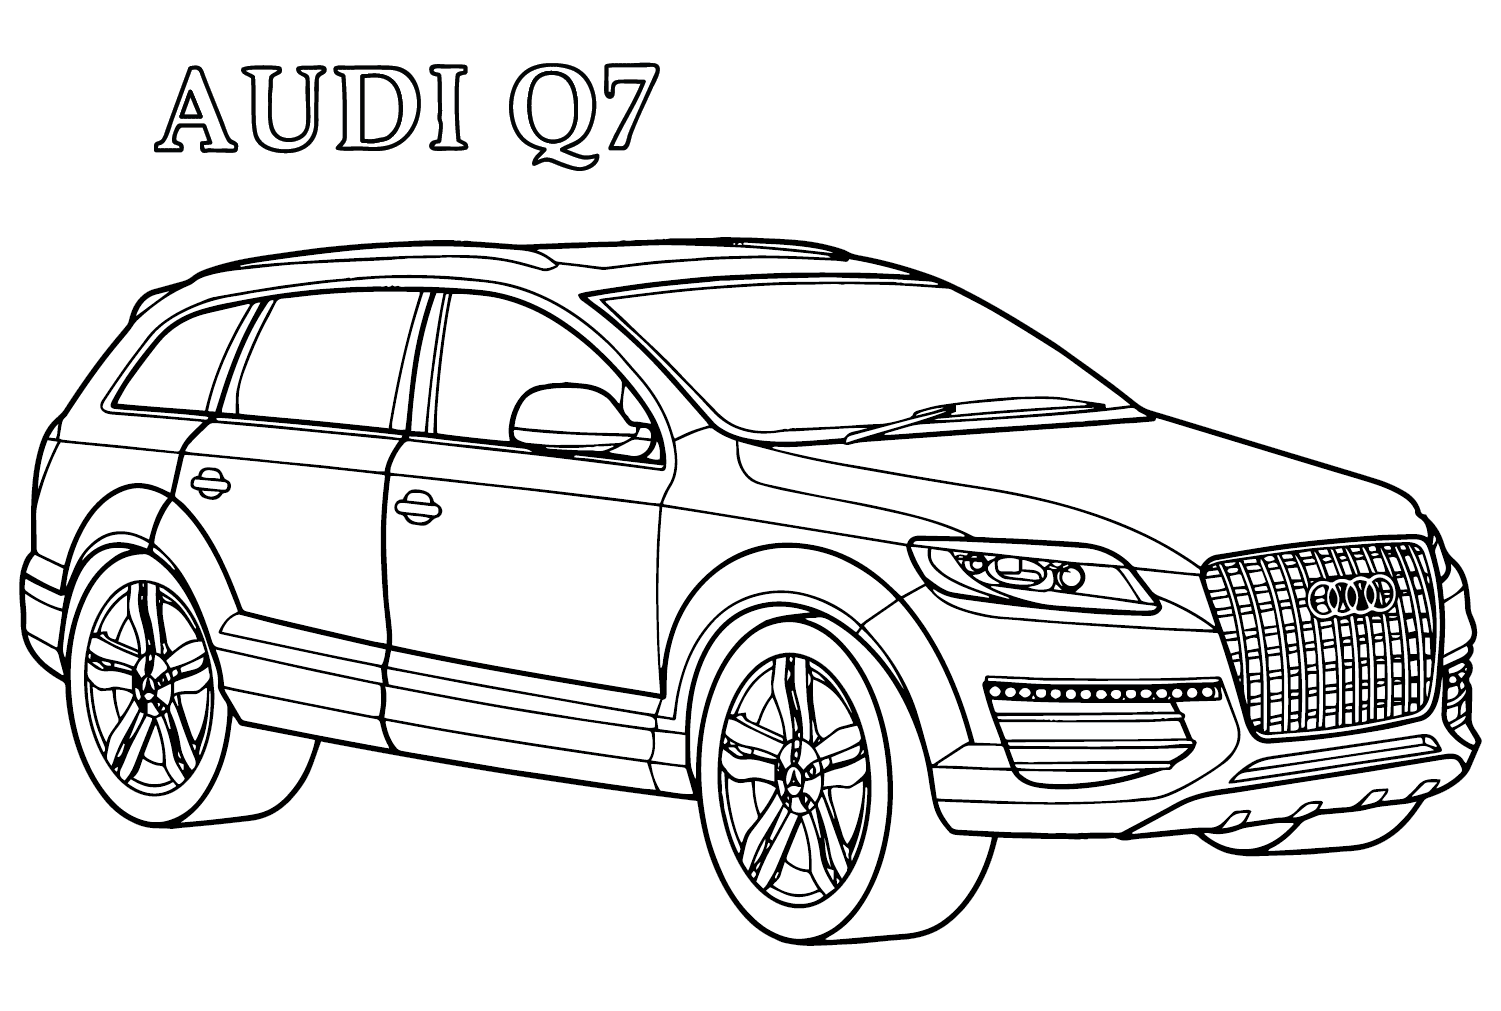 Audi Q7 Coloring Page from Audi